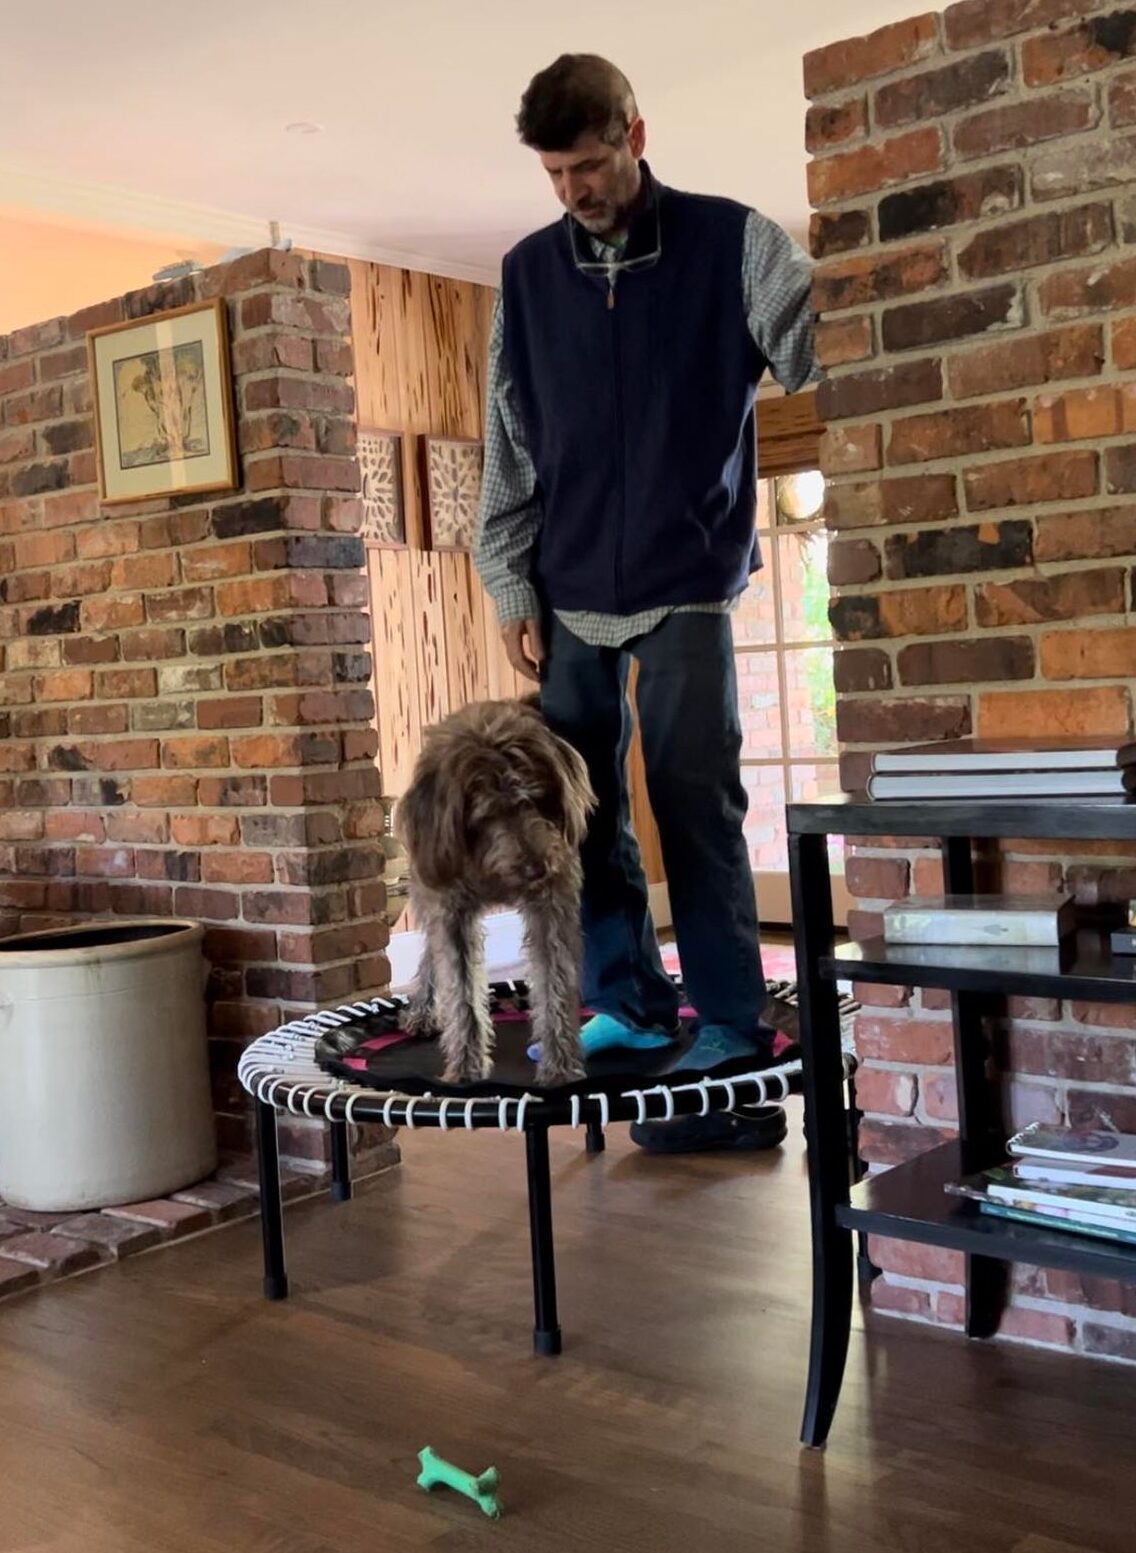 Neill Ferrill and his dog doing rebounding exercise on a mini trampoline during brain tumor treatment